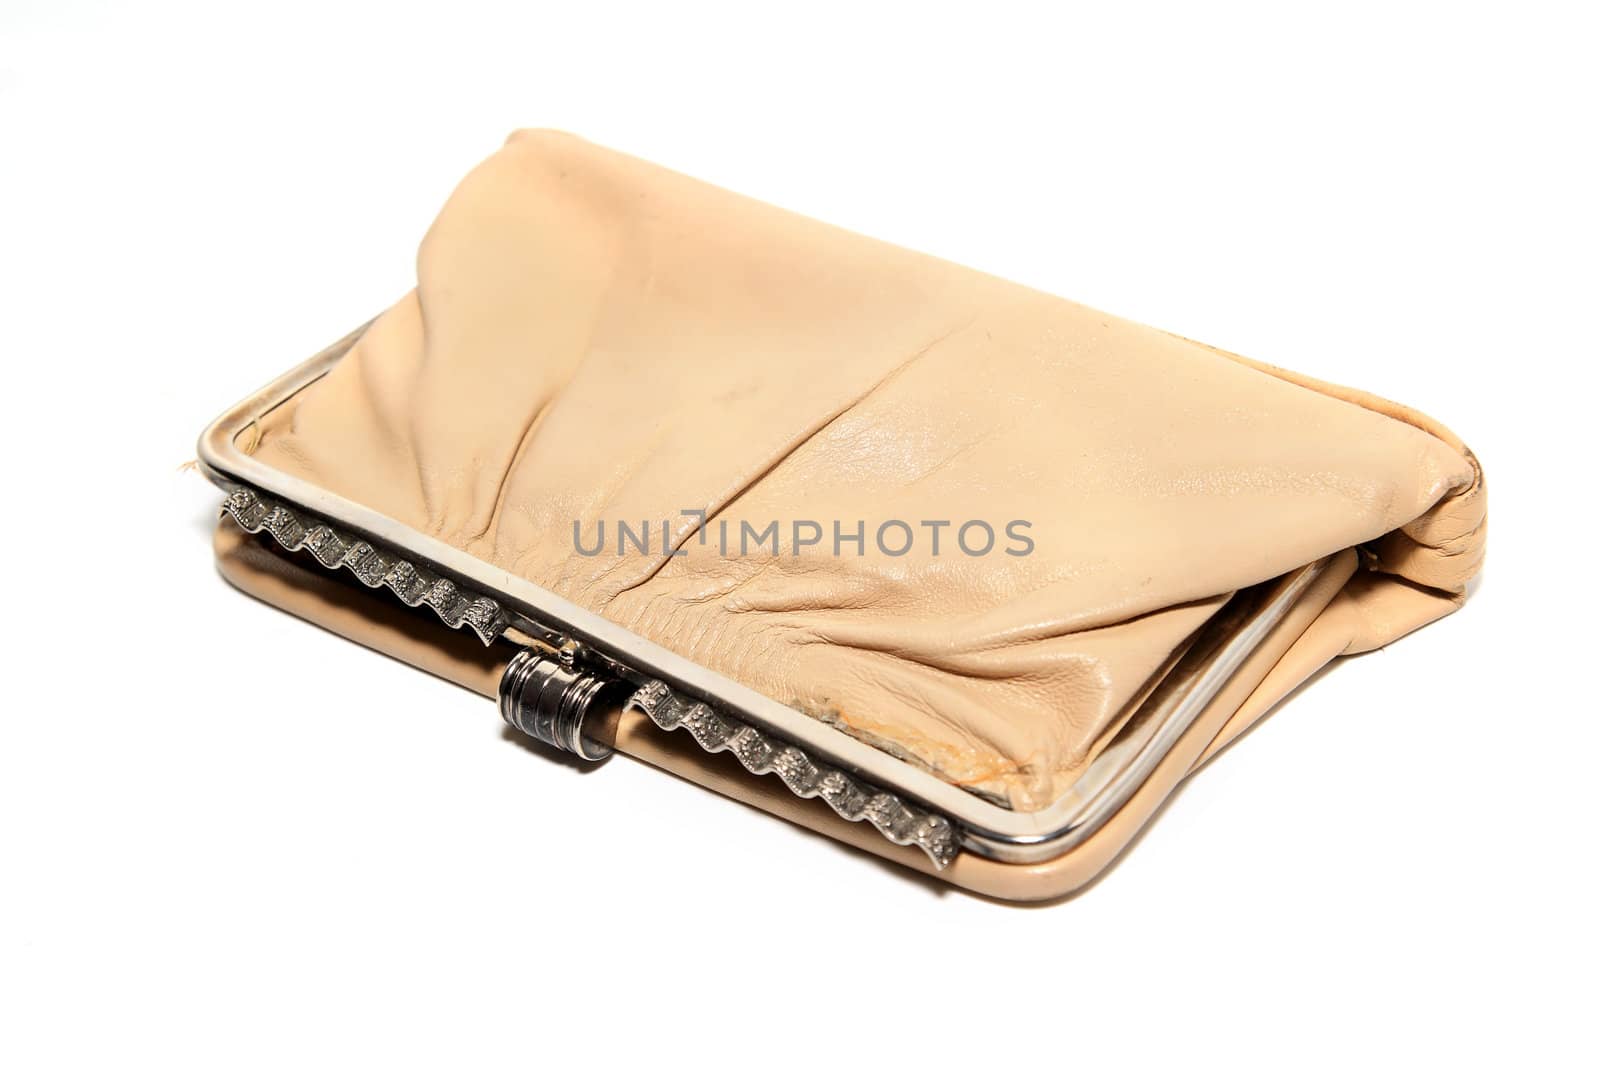 old purse on white background by basel101658